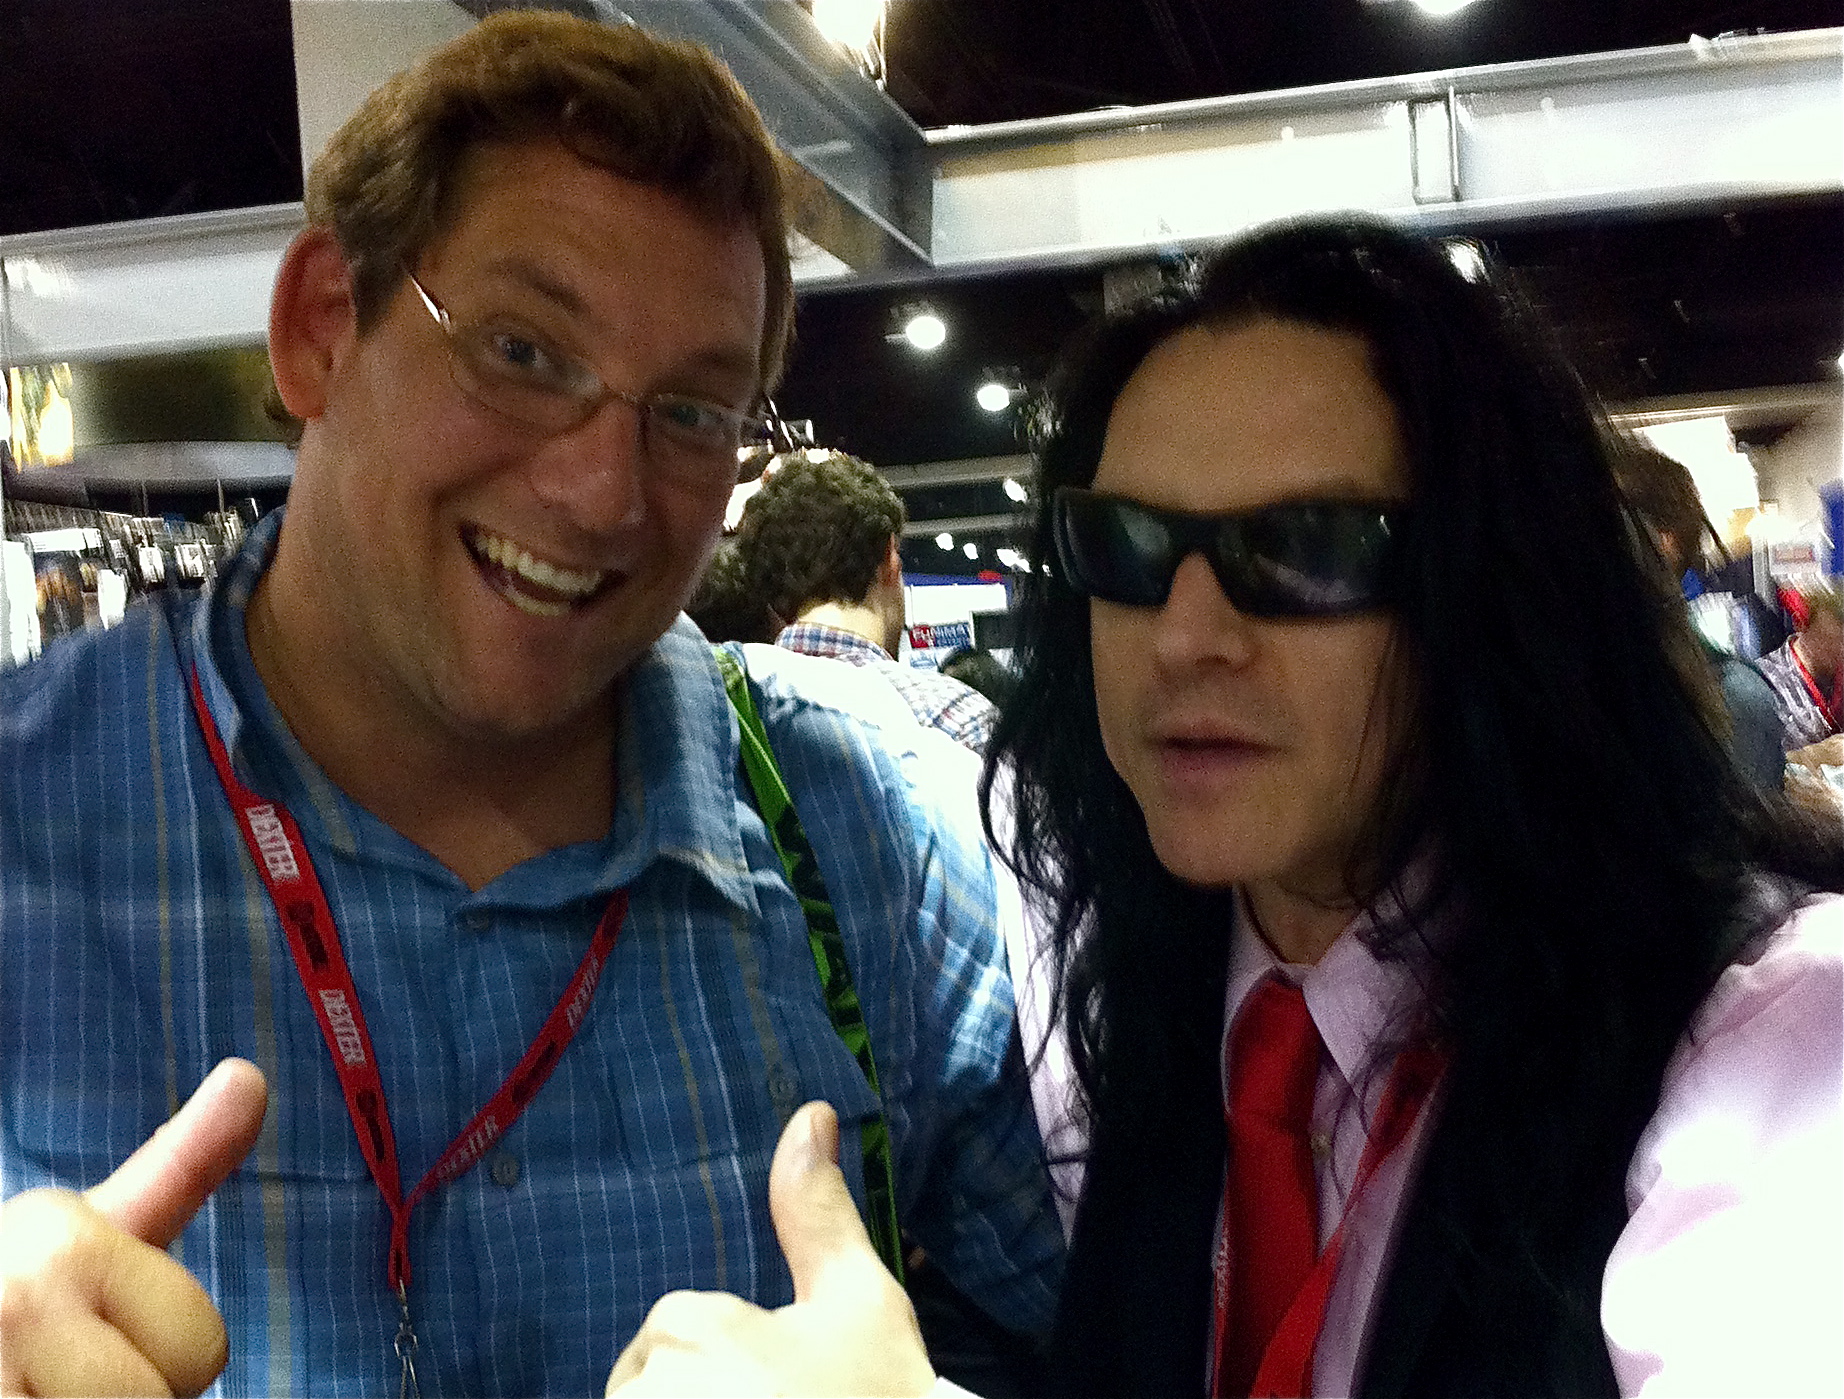 Tommy Wiseau and Dan Lantz present their films in the Atom Films Booth at ComicCON.